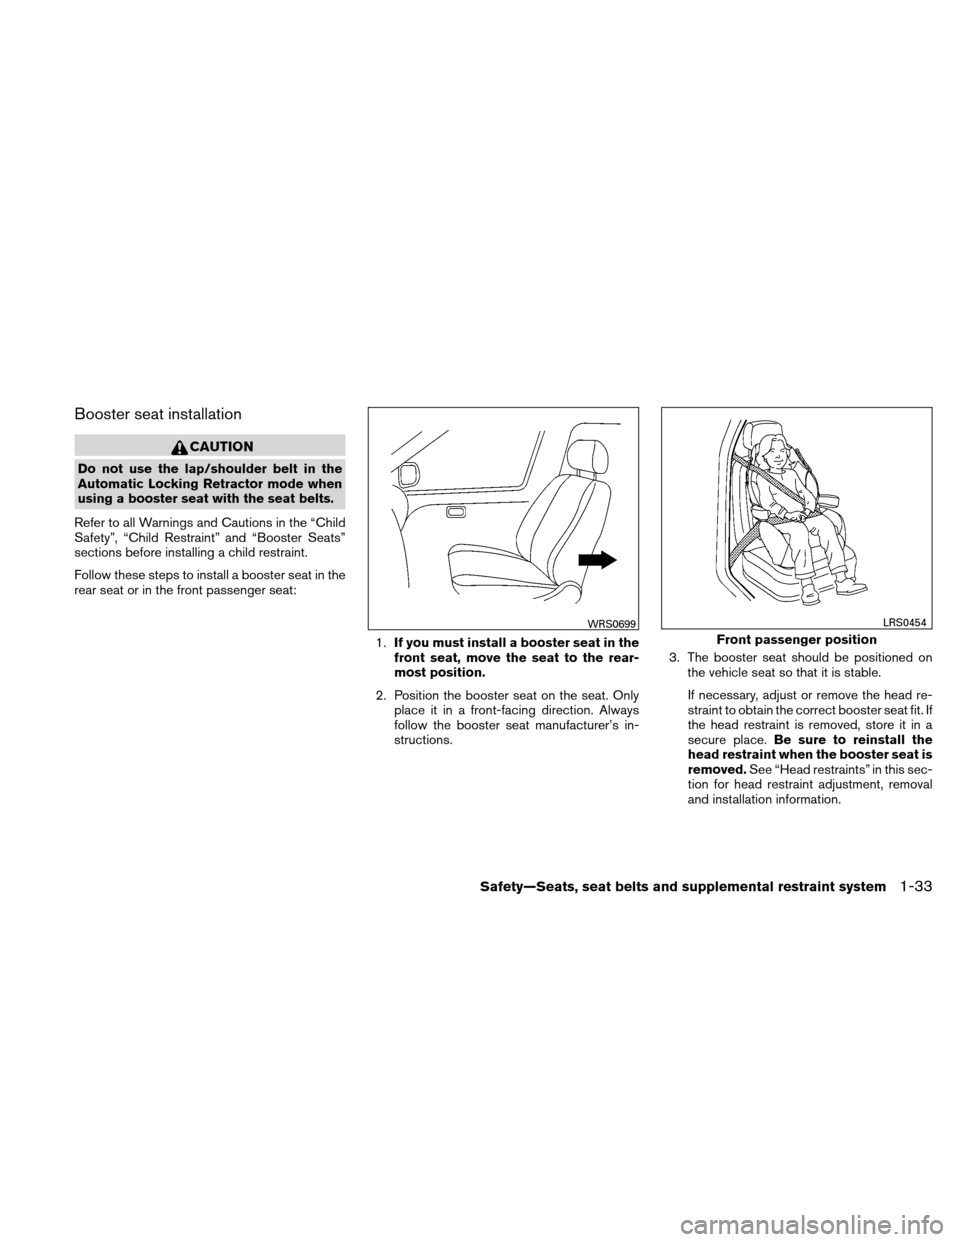 NISSAN ALTIMA HYBRID 2010 L32A / 4.G User Guide Booster seat installation
CAUTION
Do not use the lap/shoulder belt in the
Automatic Locking Retractor mode when
using a booster seat with the seat belts.
Refer to all Warnings and Cautions in the “C